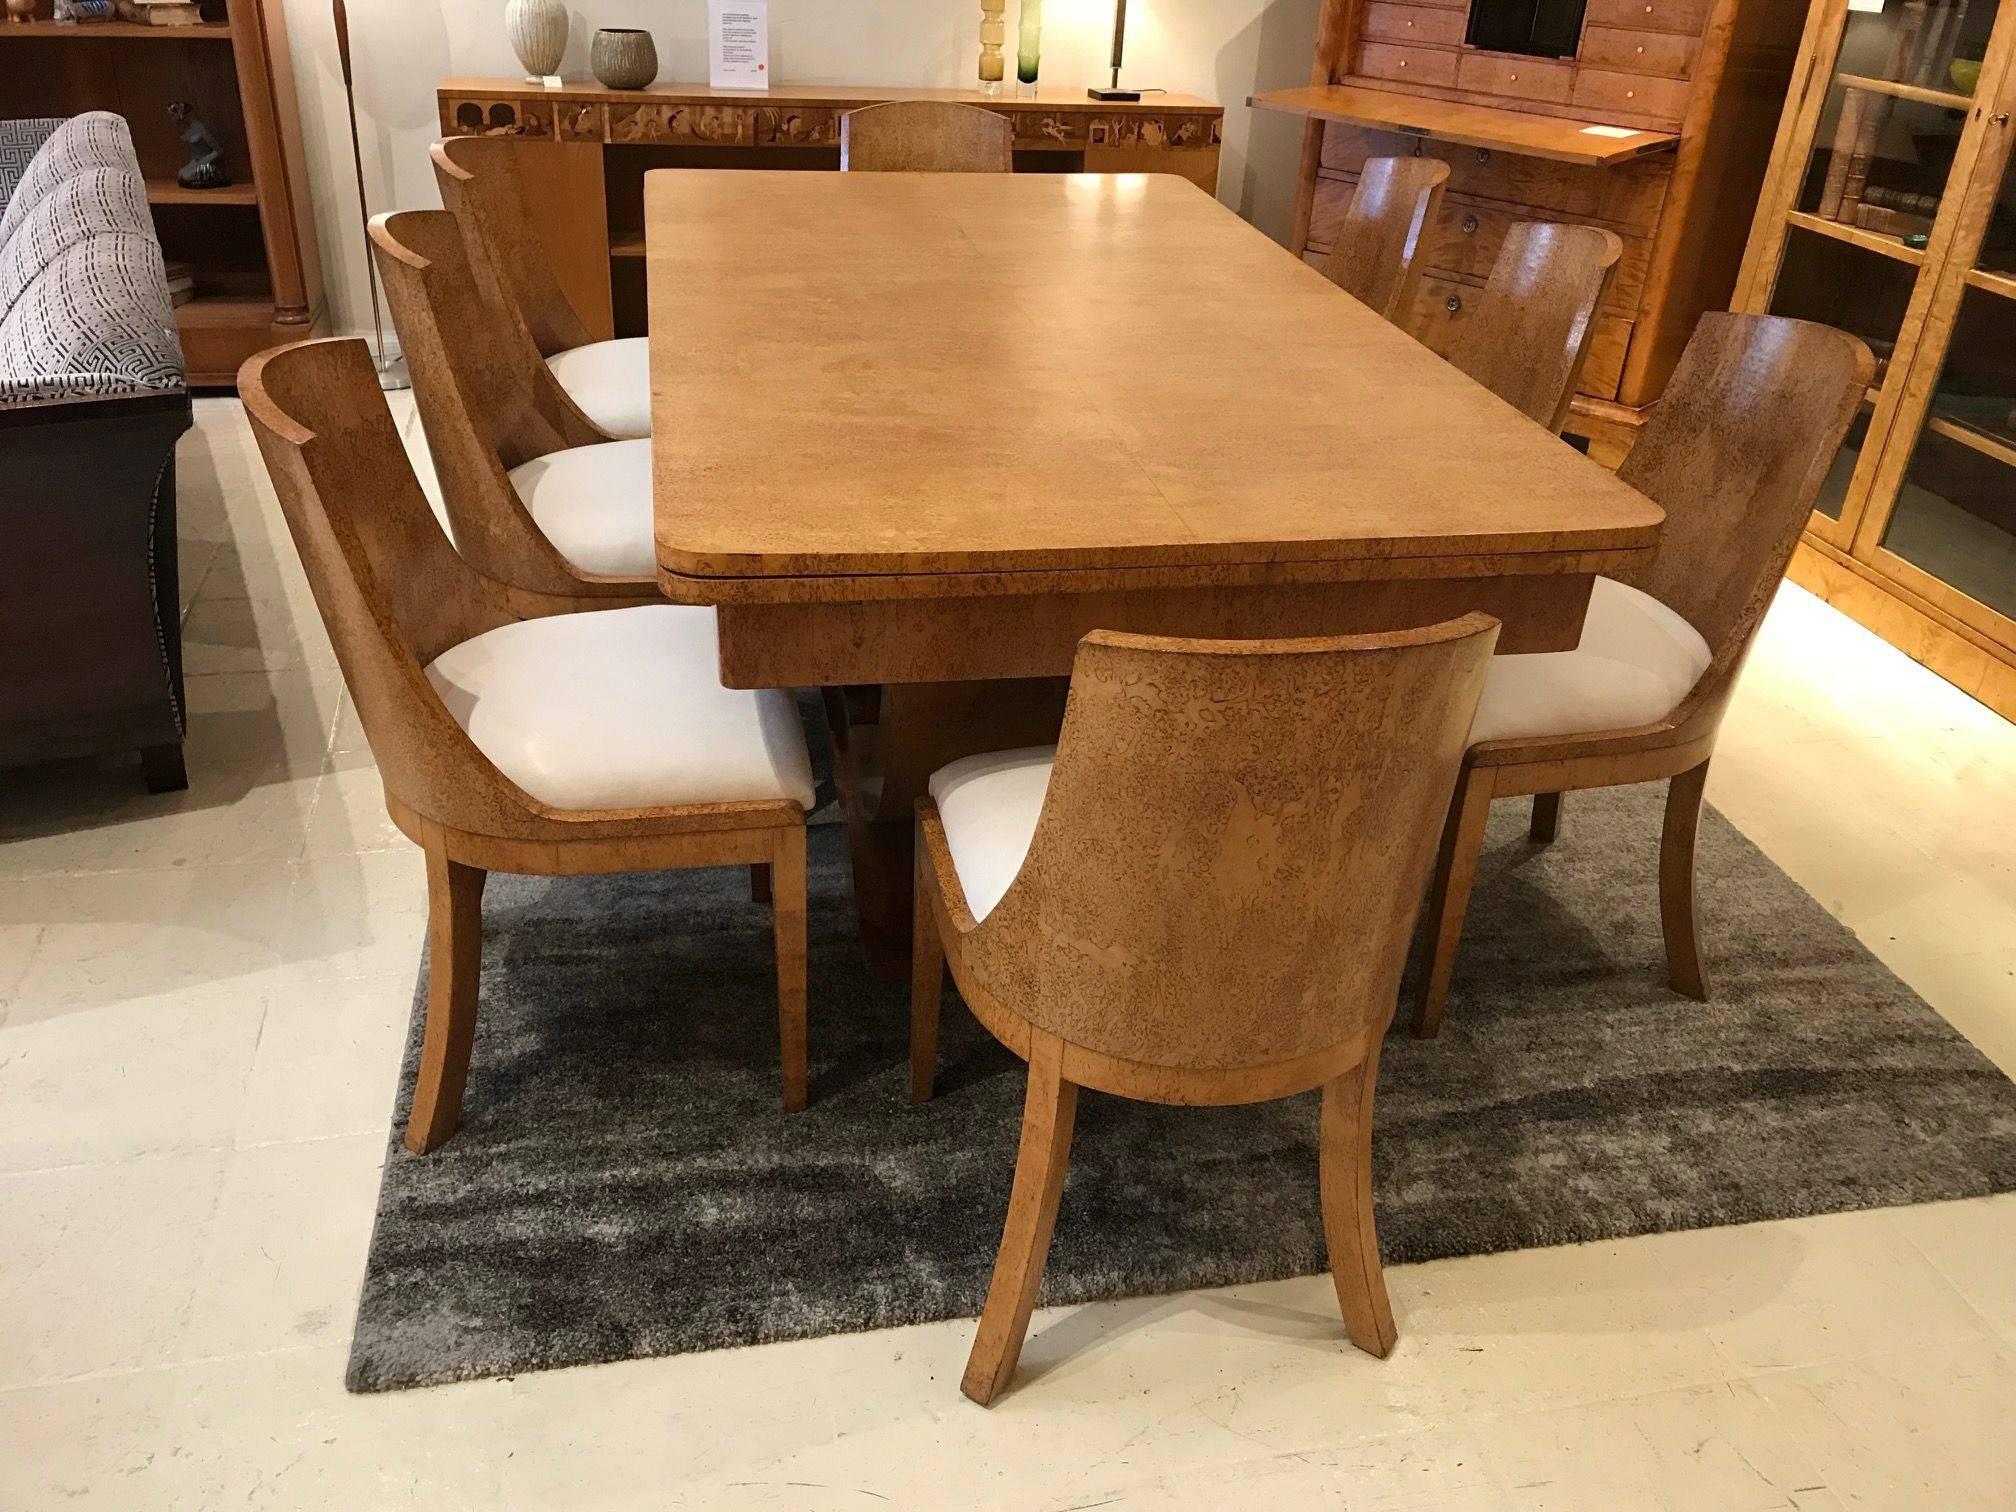 Magnificent Karelian Birch Art Deco dining table with two extensions. With eight matching solid curved back chairs which have been reupholstered in a macro suede fabric. The table has a curved support which rests on a shaped base.
When fully